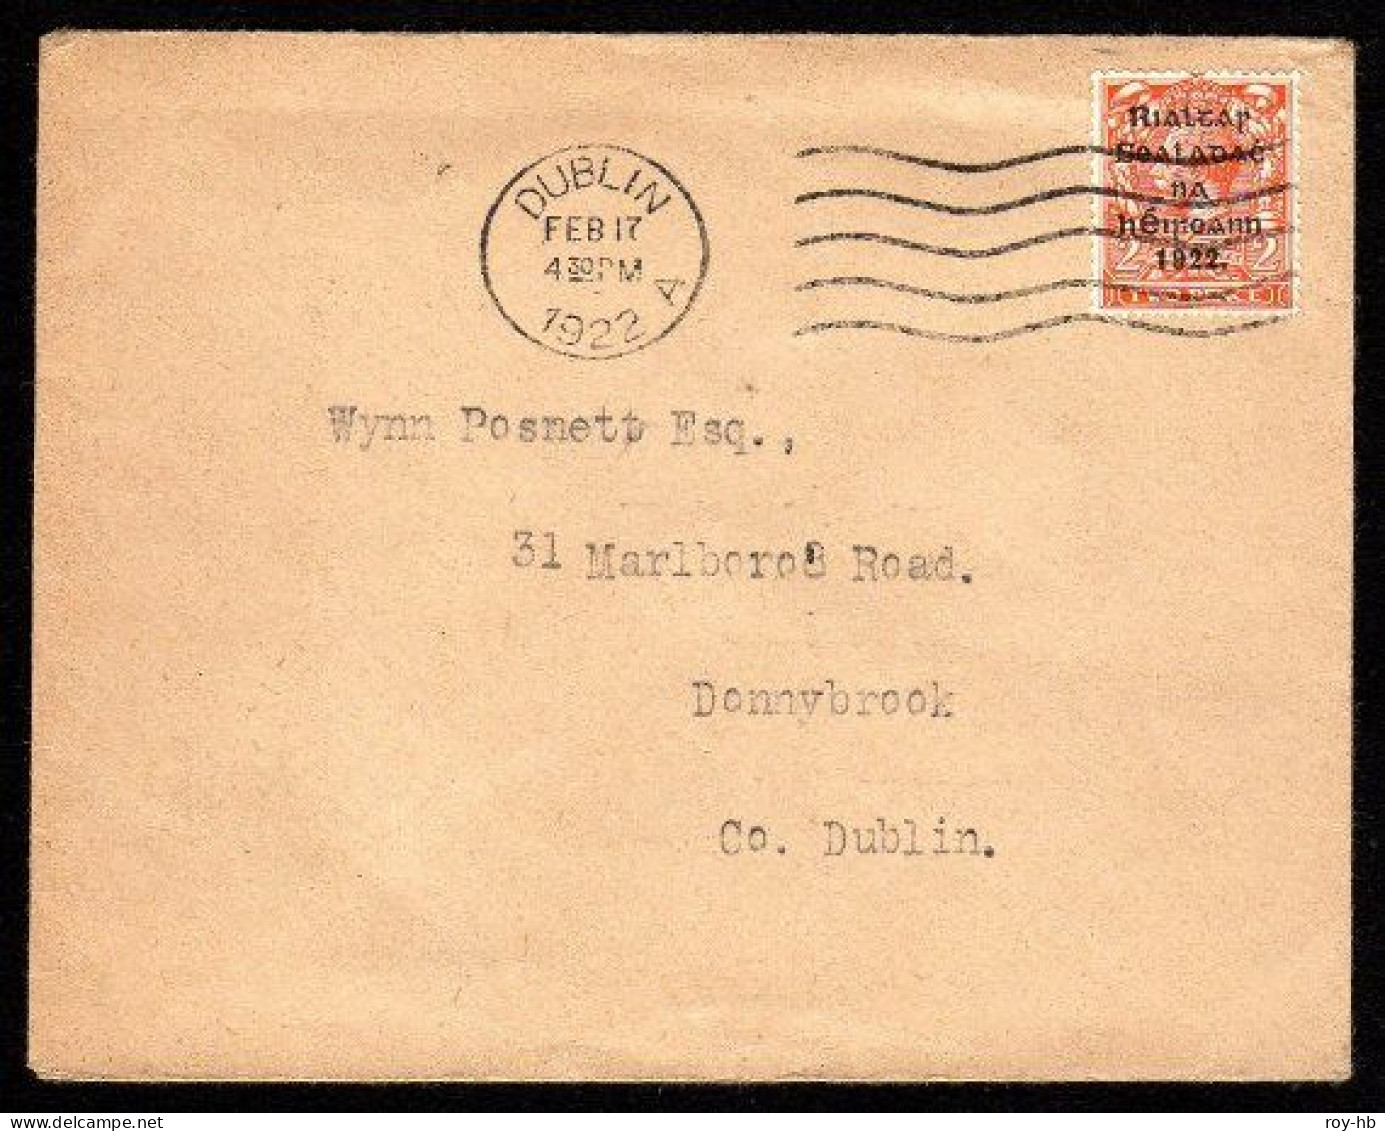 1922 Thom 2d Die II Single On A Local Dublin Cover, Well Tied By A Clear Machine Cancel For 17 FE 22, The First Day. - Cartas & Documentos